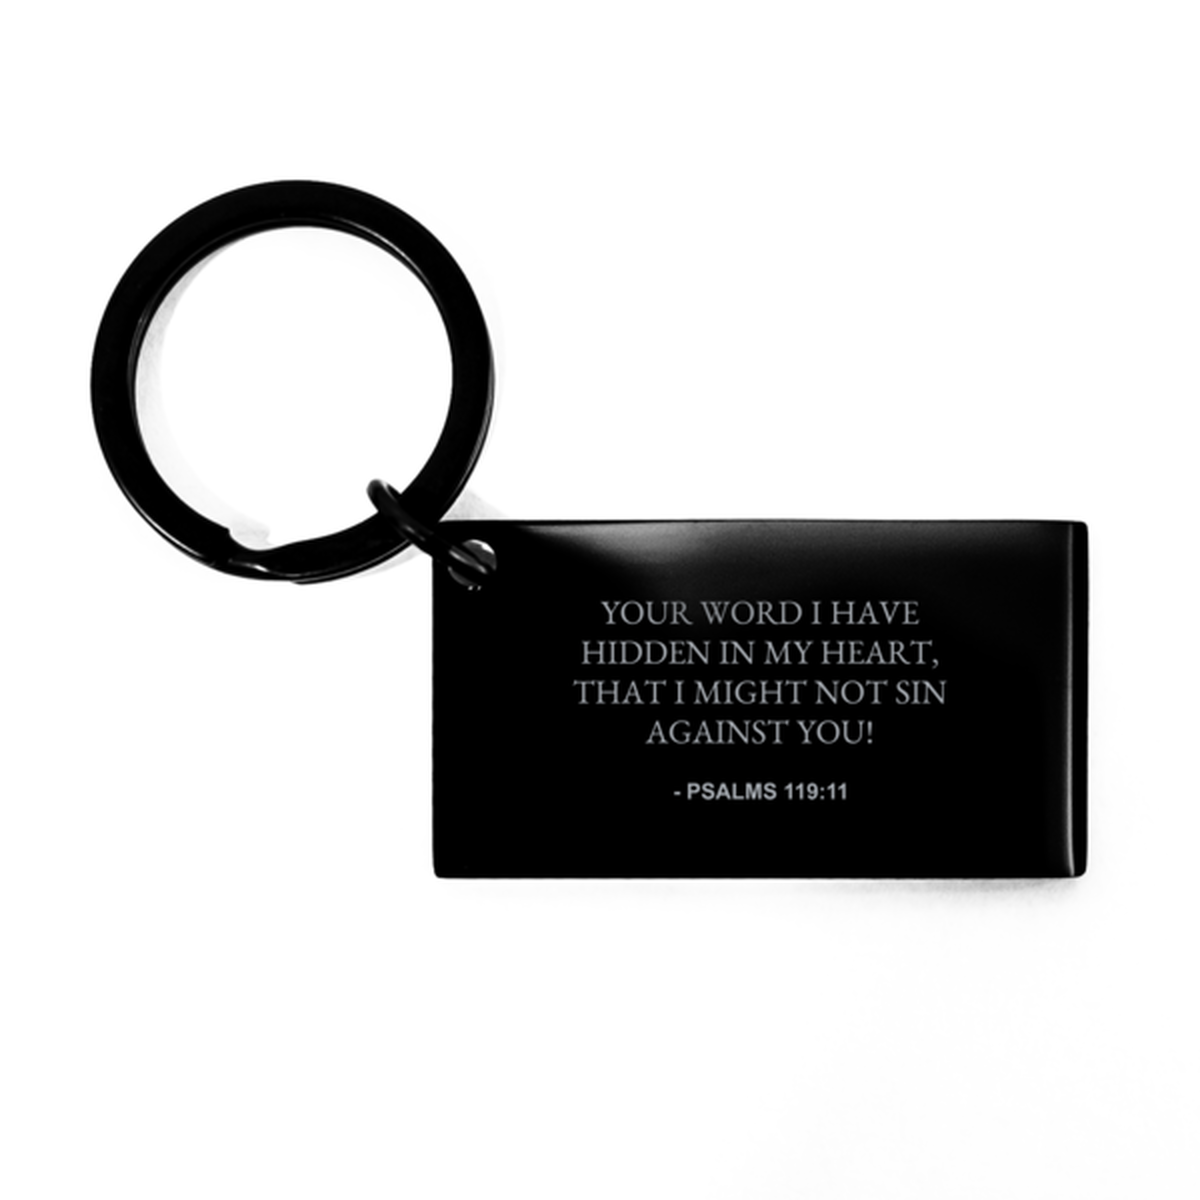 Bible Verse Black Keychain, Psalms 119:11 Your Word I Have Hidden In My Heart, Christian Inspirational Key Ring Gifts For Men Women